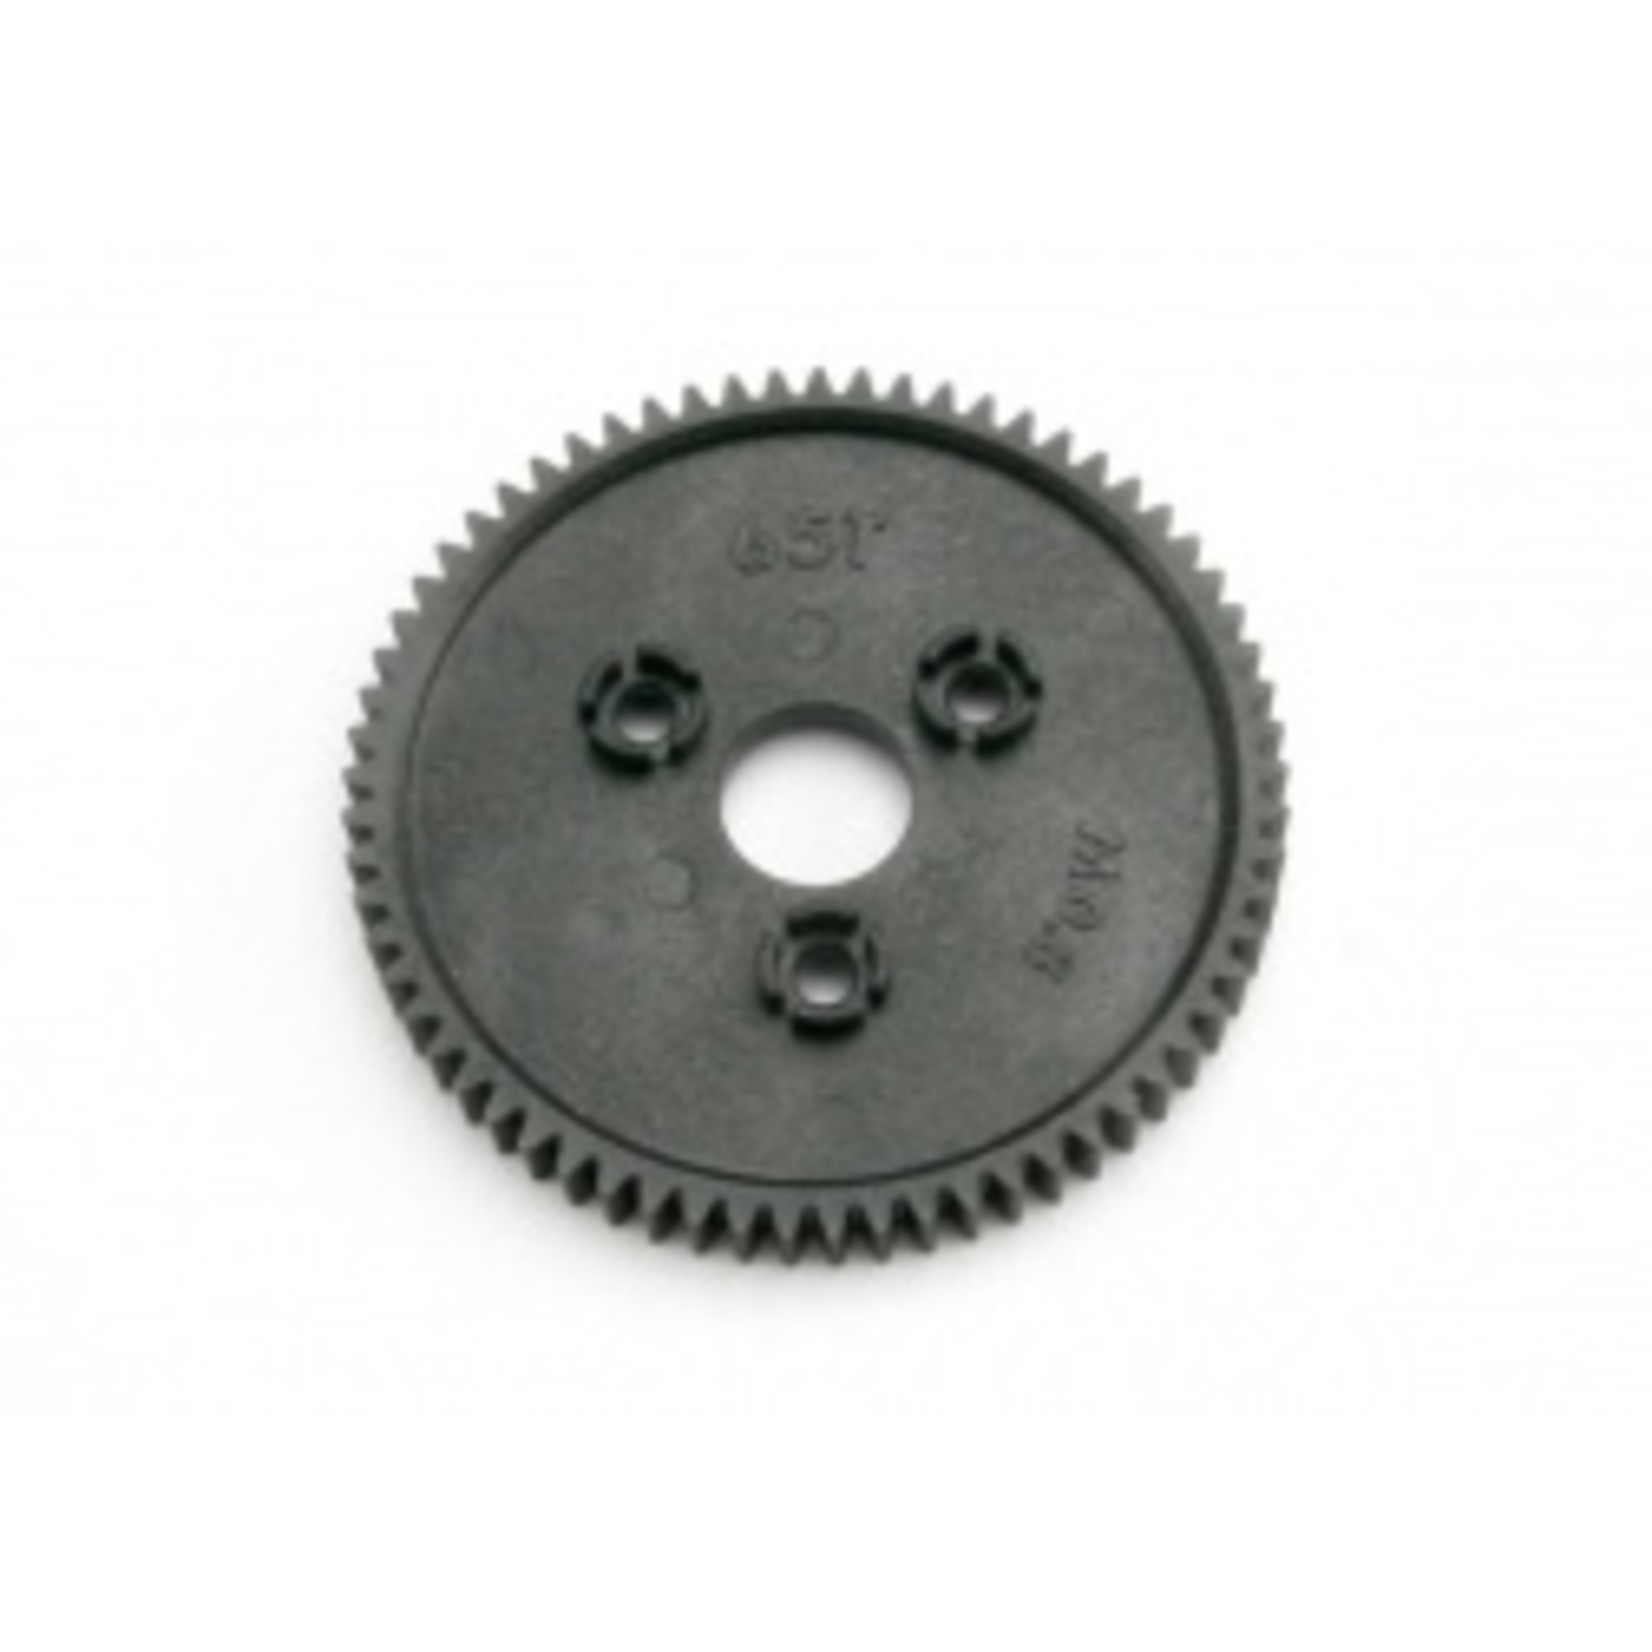 Traxxas 3960 Spur gear, 65-tooth (0.8 metric pitch, compatible with 32-pitch)